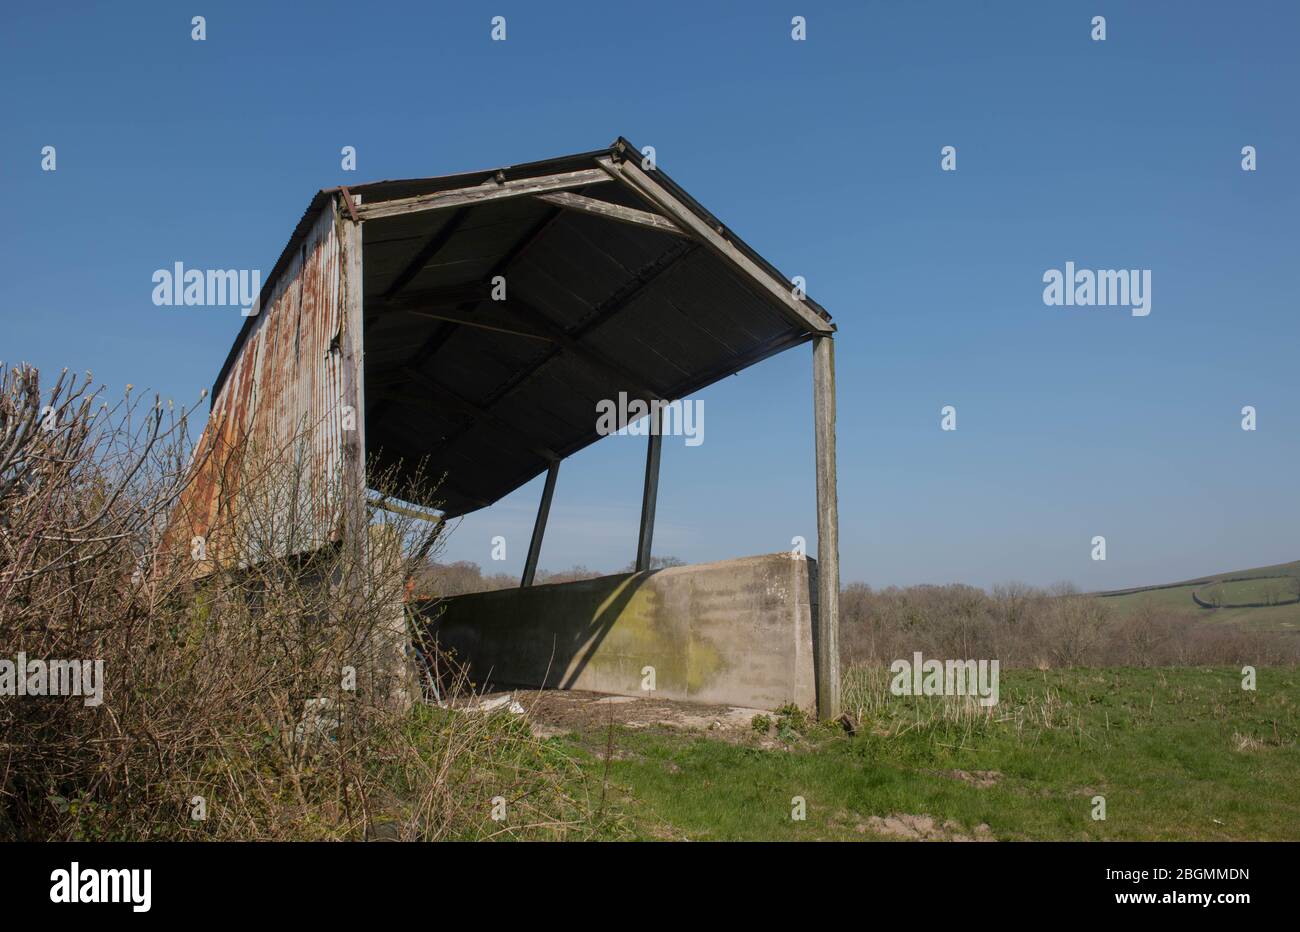 Dilapidated Farm Barn in a Field with a Bright Blue Sky Background in the Rural Devon Countryside, England, UK Stock Photo